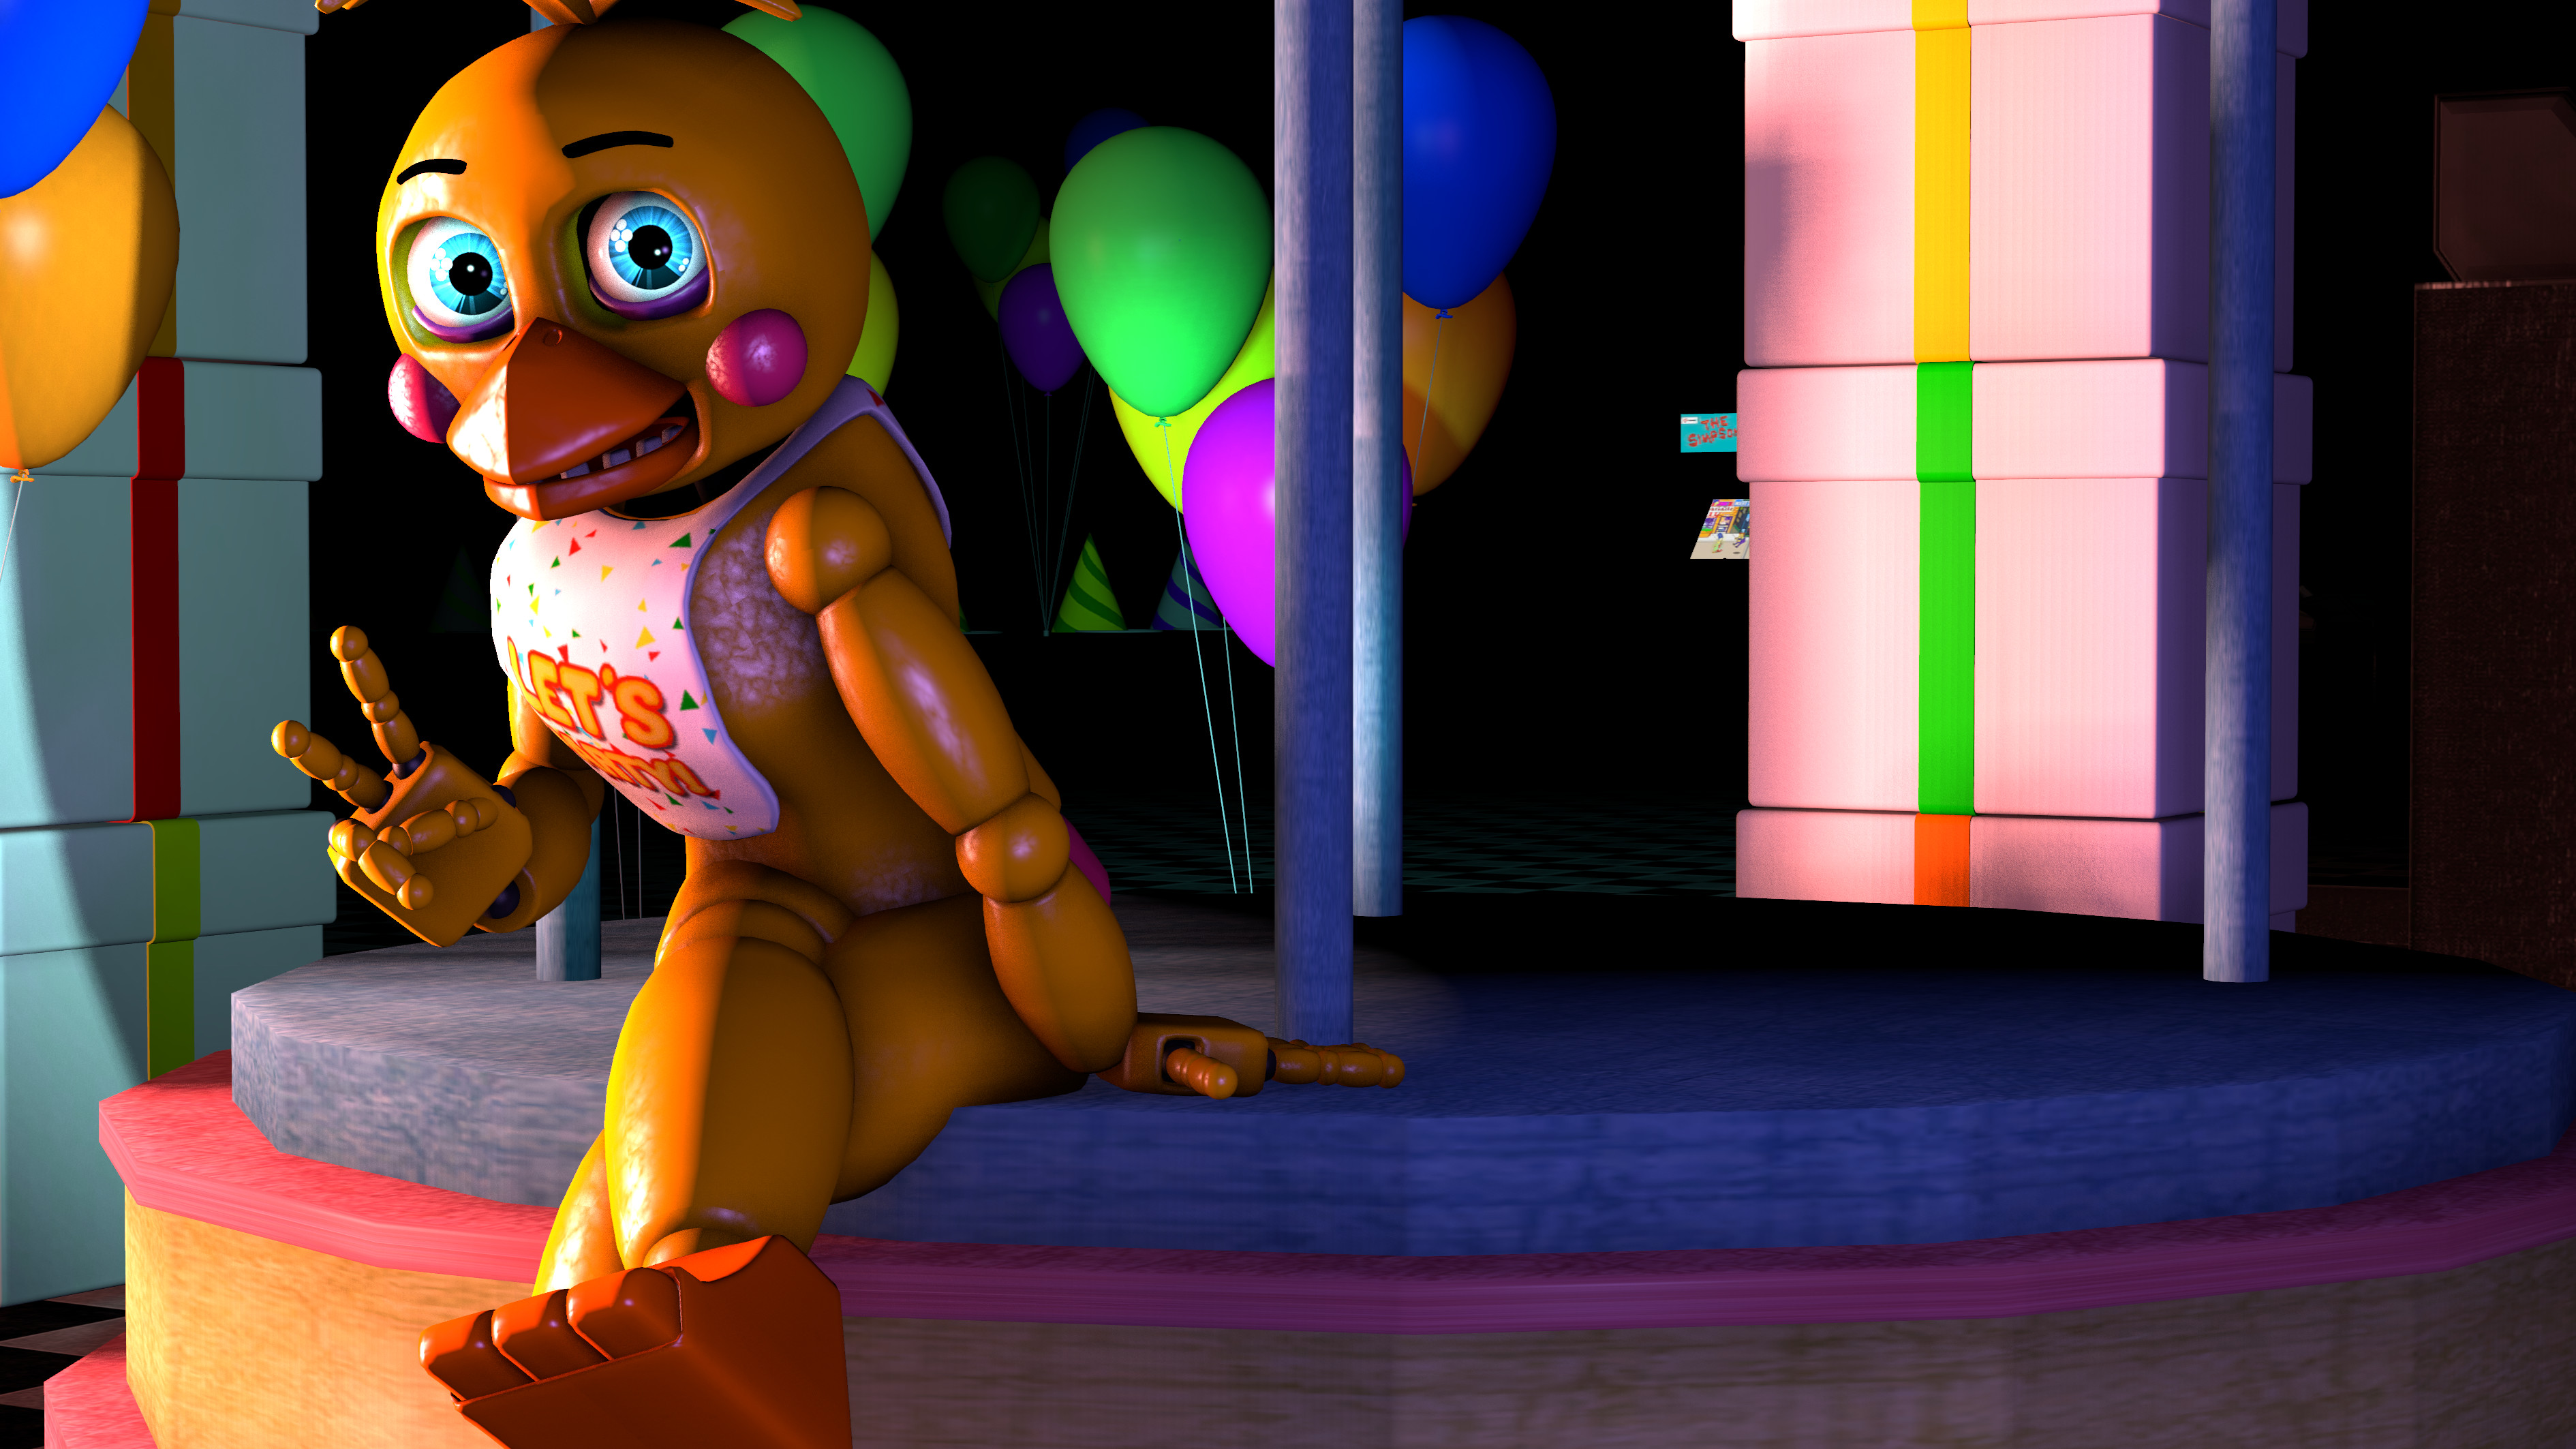 3780x2126 ... [FNAF SFM] Toy Chica's Bio by Delirious411